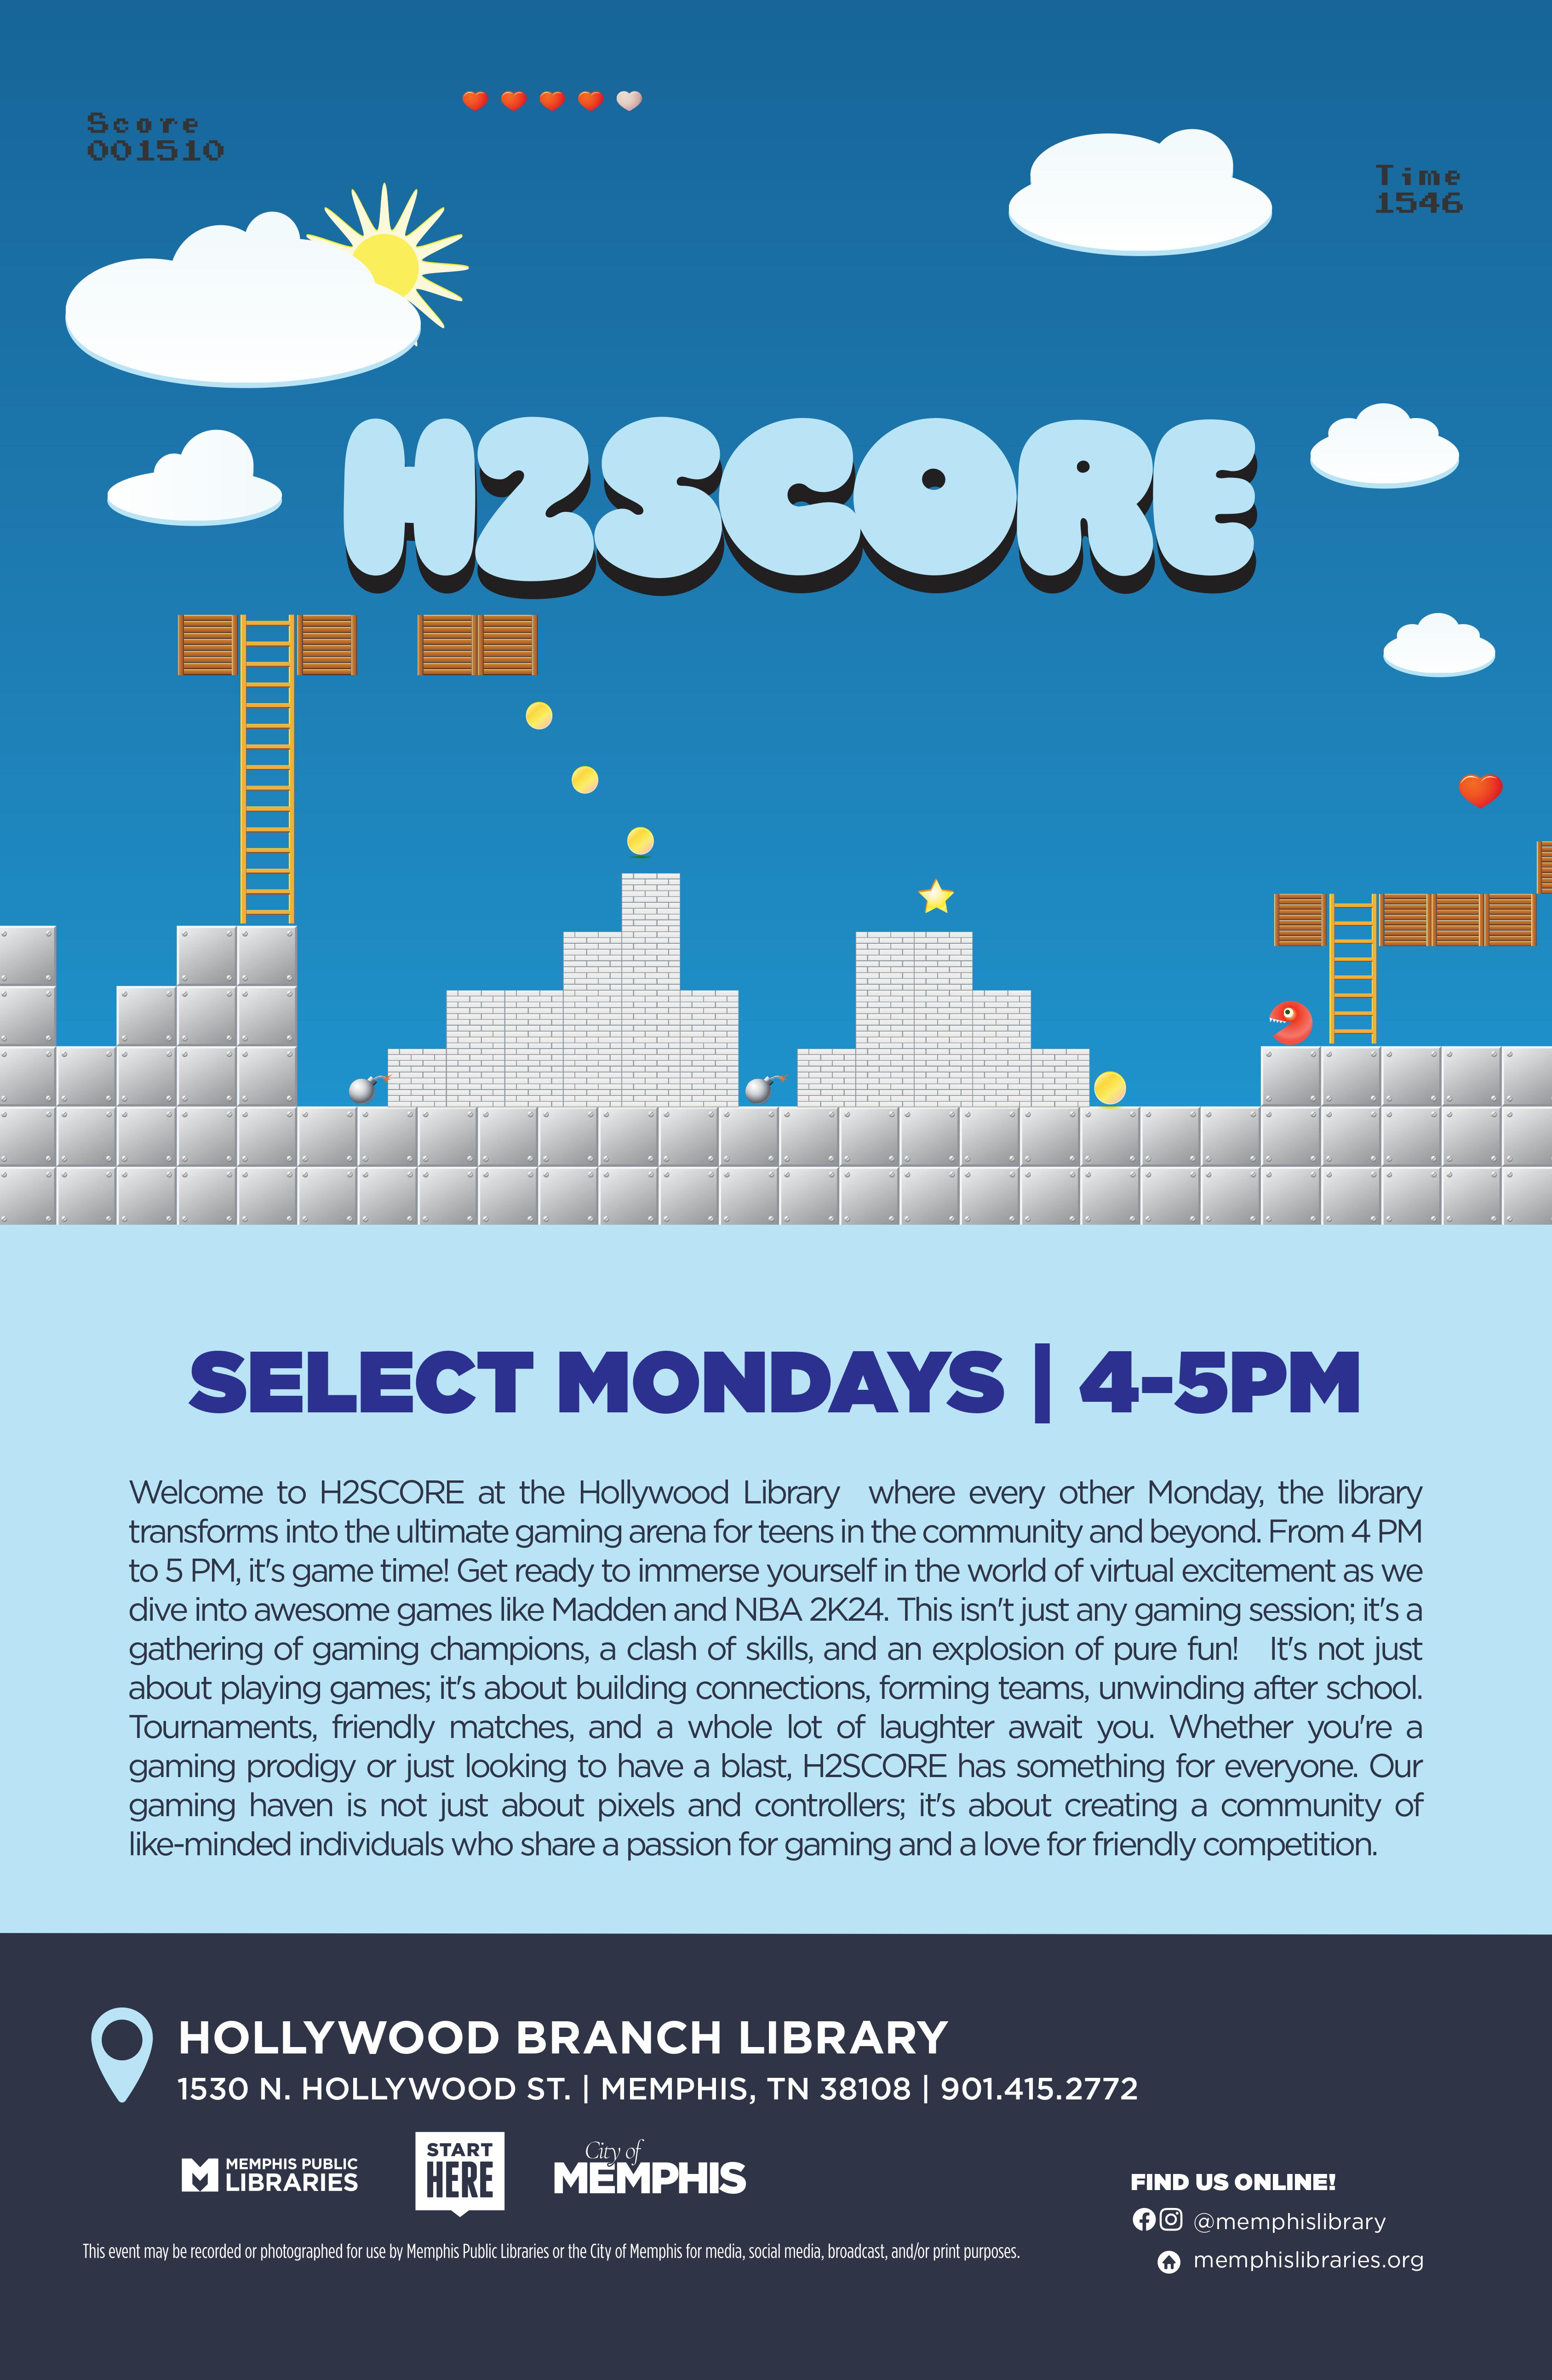 Welcome to H2SCORE!